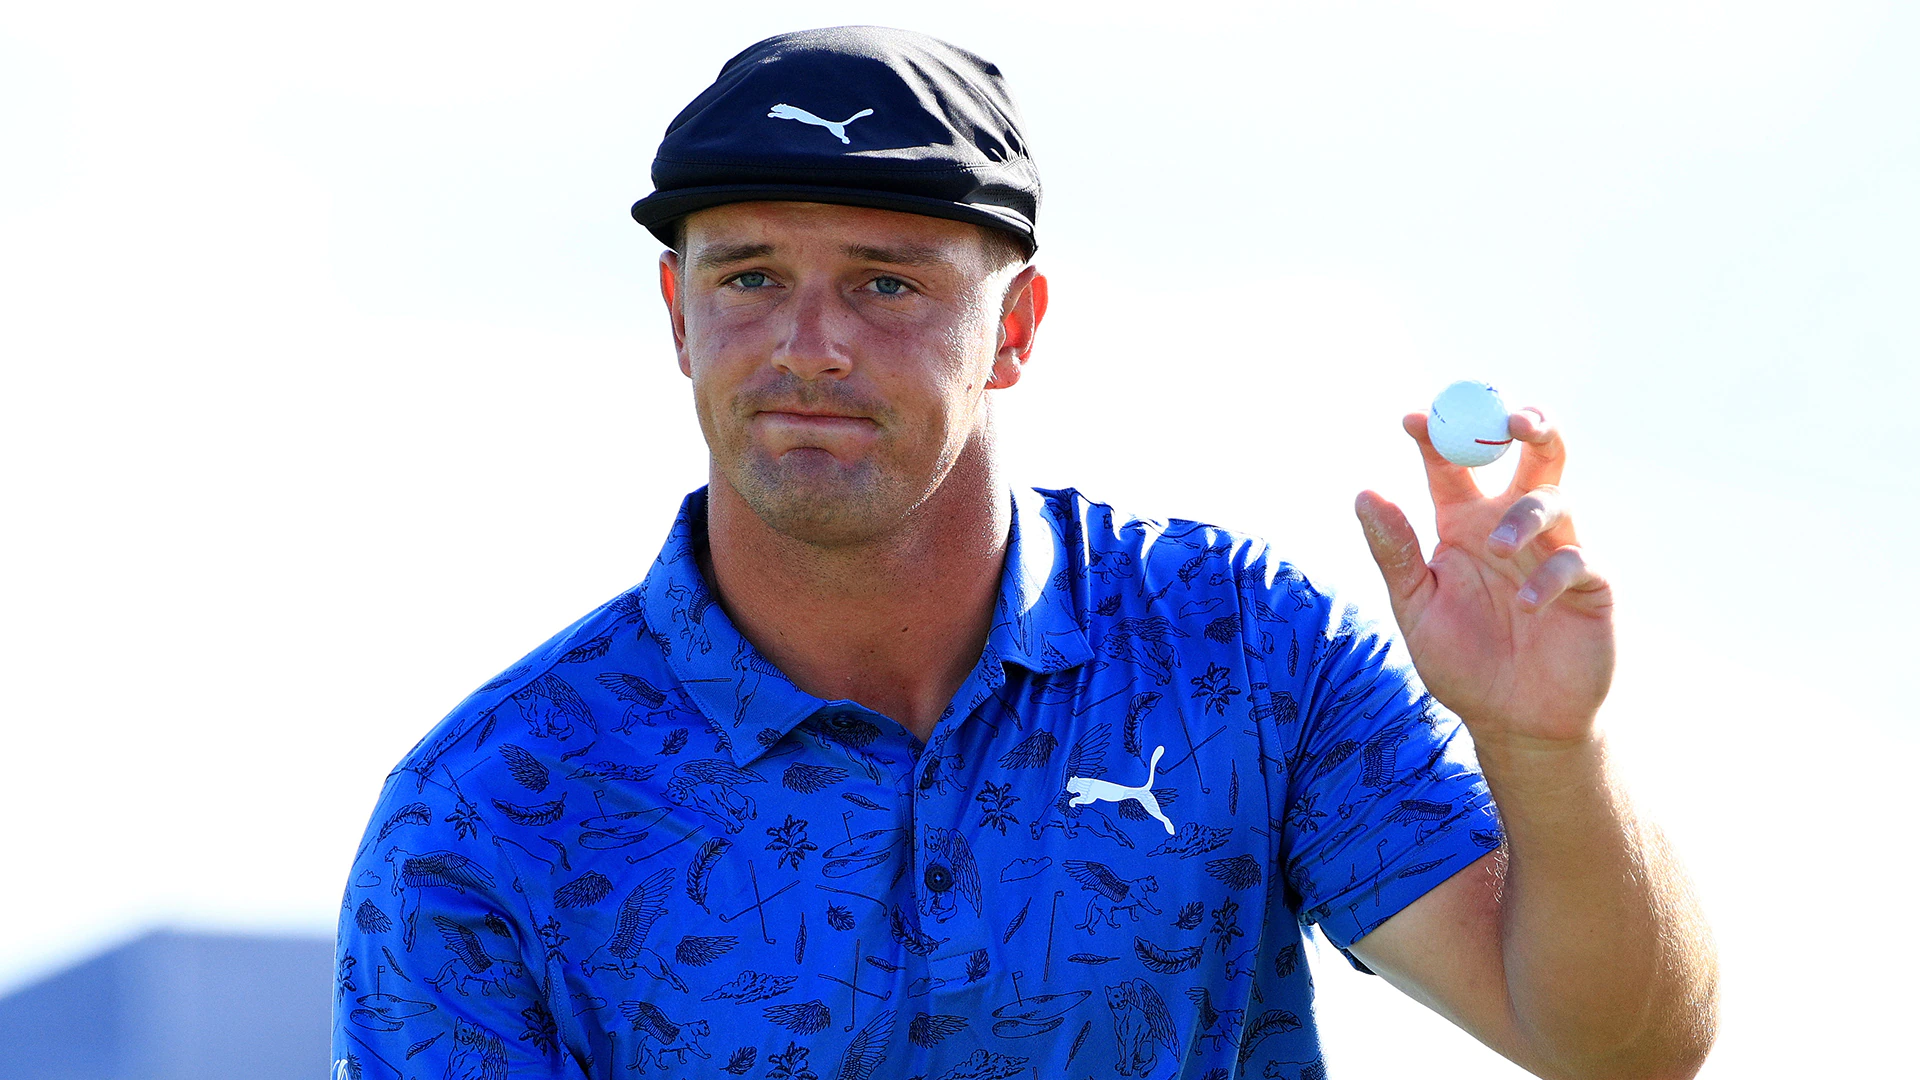 Bryson DeChambeau creates video to show he’s not on steroids